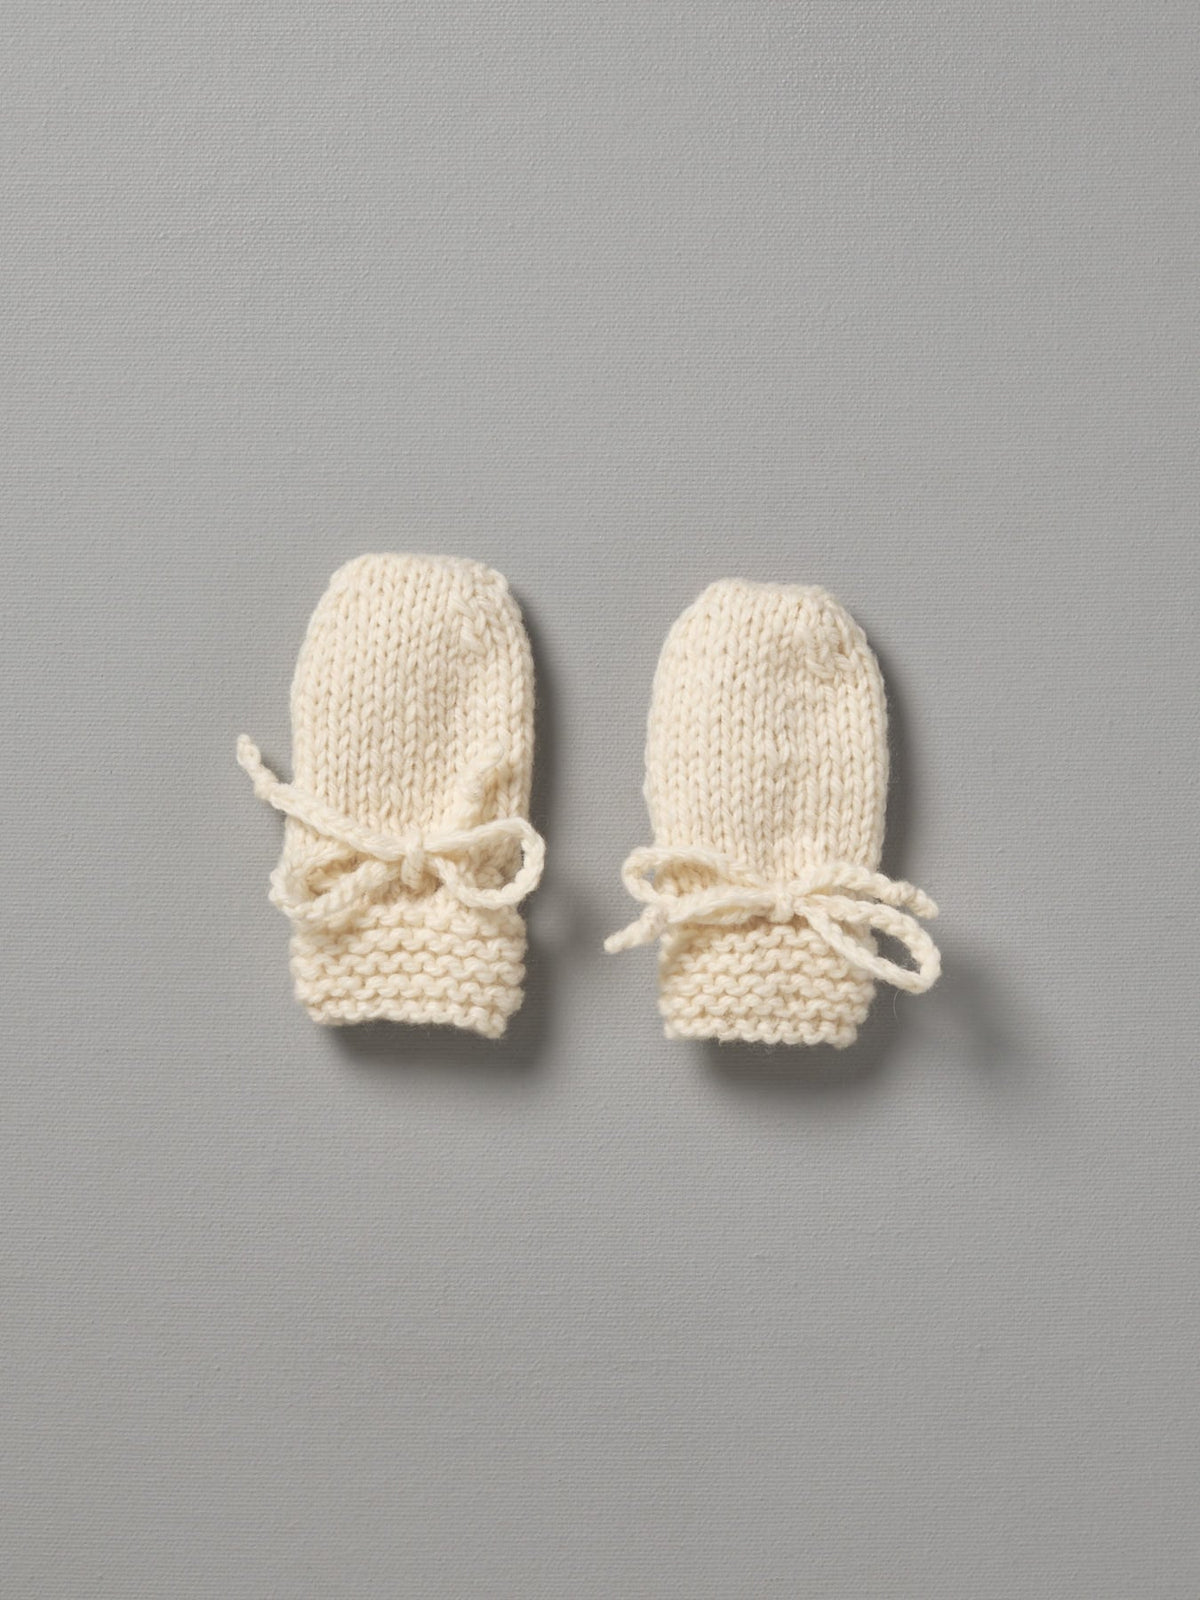 Two Weebits Hand Knitted Mittens on a grey background.